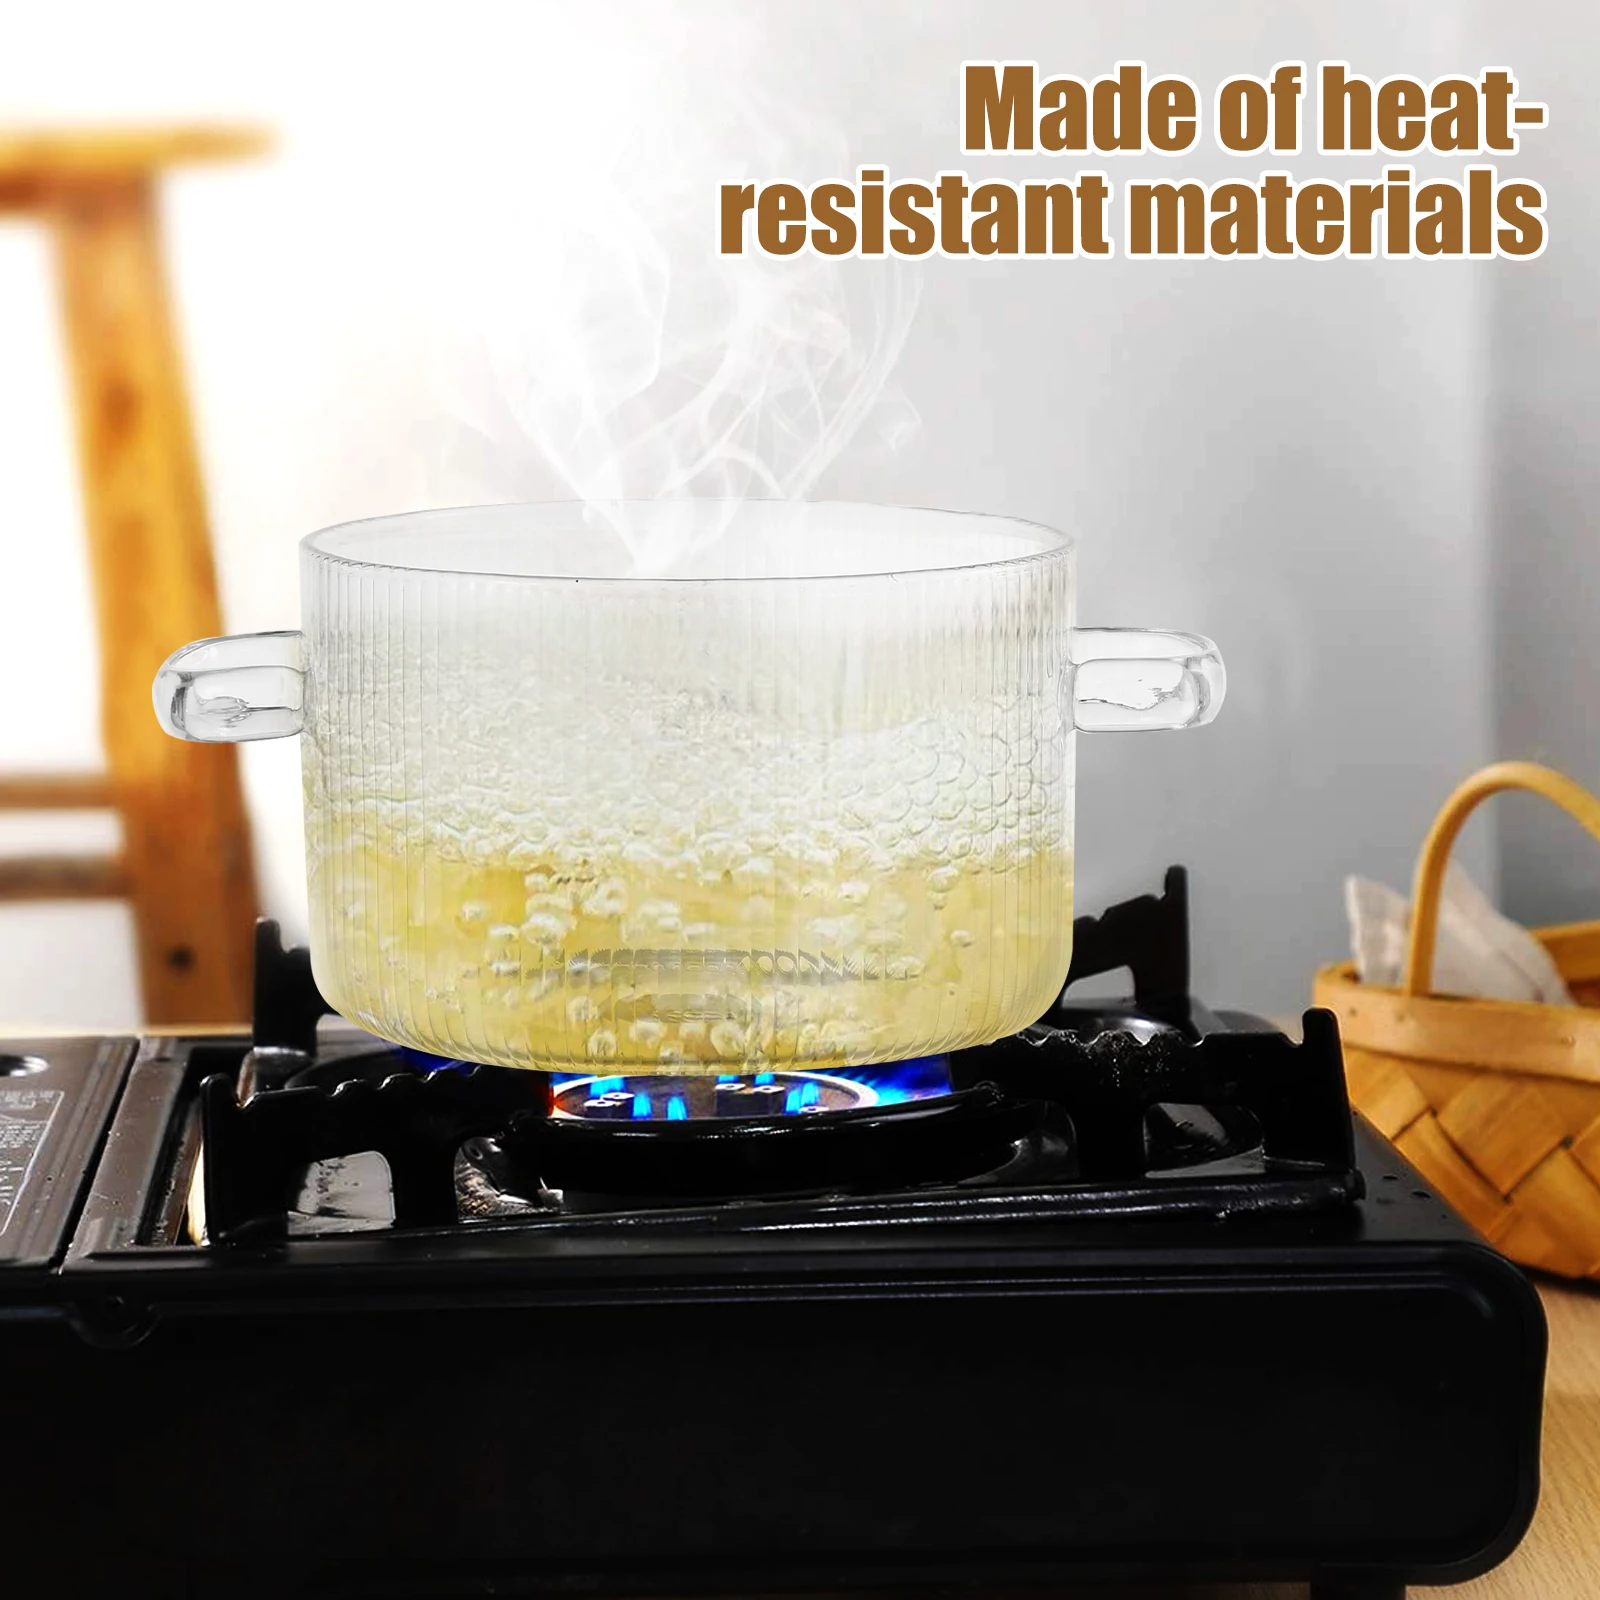 https://ae01.alicdn.com/kf/S48eeac82a0da44cd8d44ca05b12942e1r/Glass-Cooking-Pot-1-7L-Transparent-Glass-Cooking-Pot-With-Bear-Lid-Home-Heat-Resistant-Glass.jpg